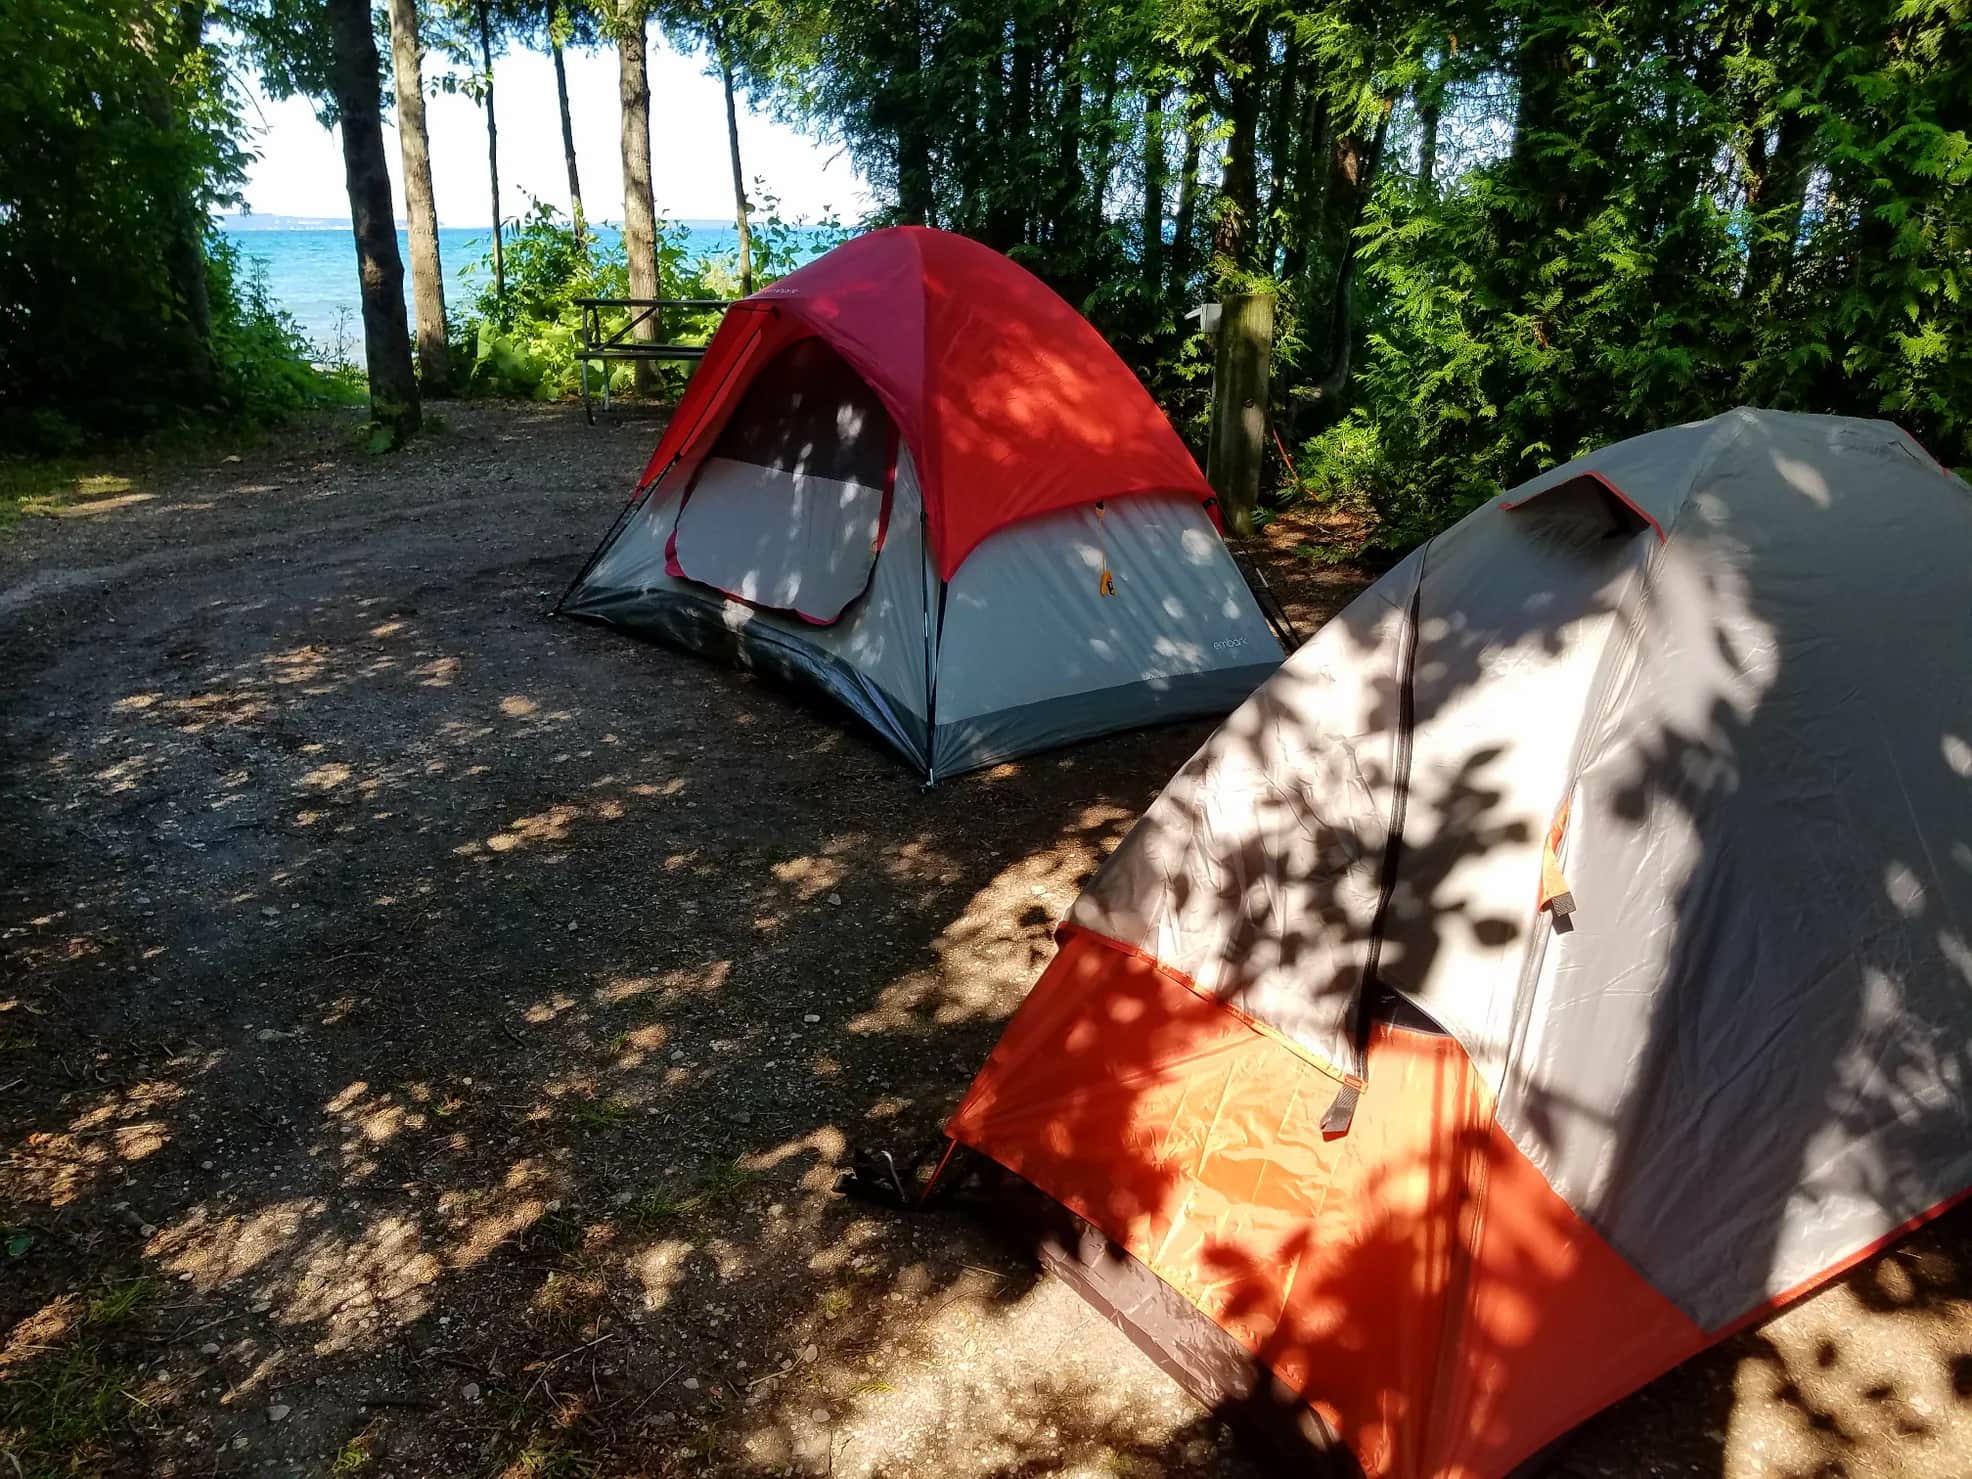 Two tents pitched in a campsite overlooking a lake in the forest.